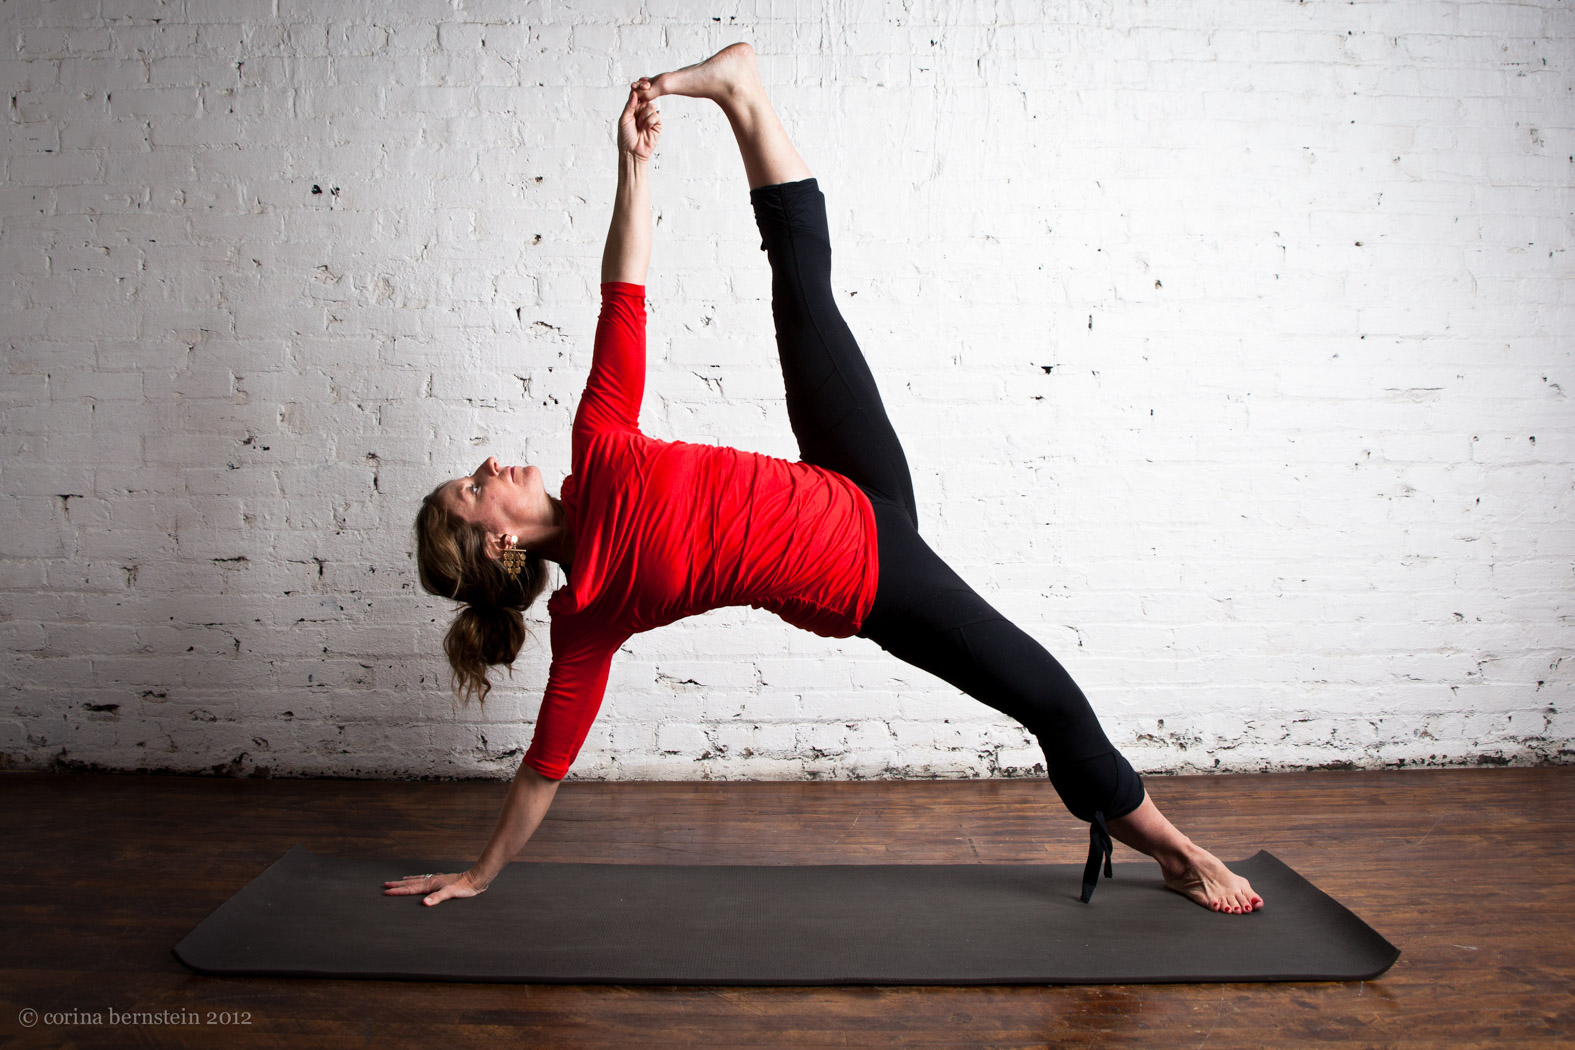 A woman wearing a red shirt doing a yoga pose